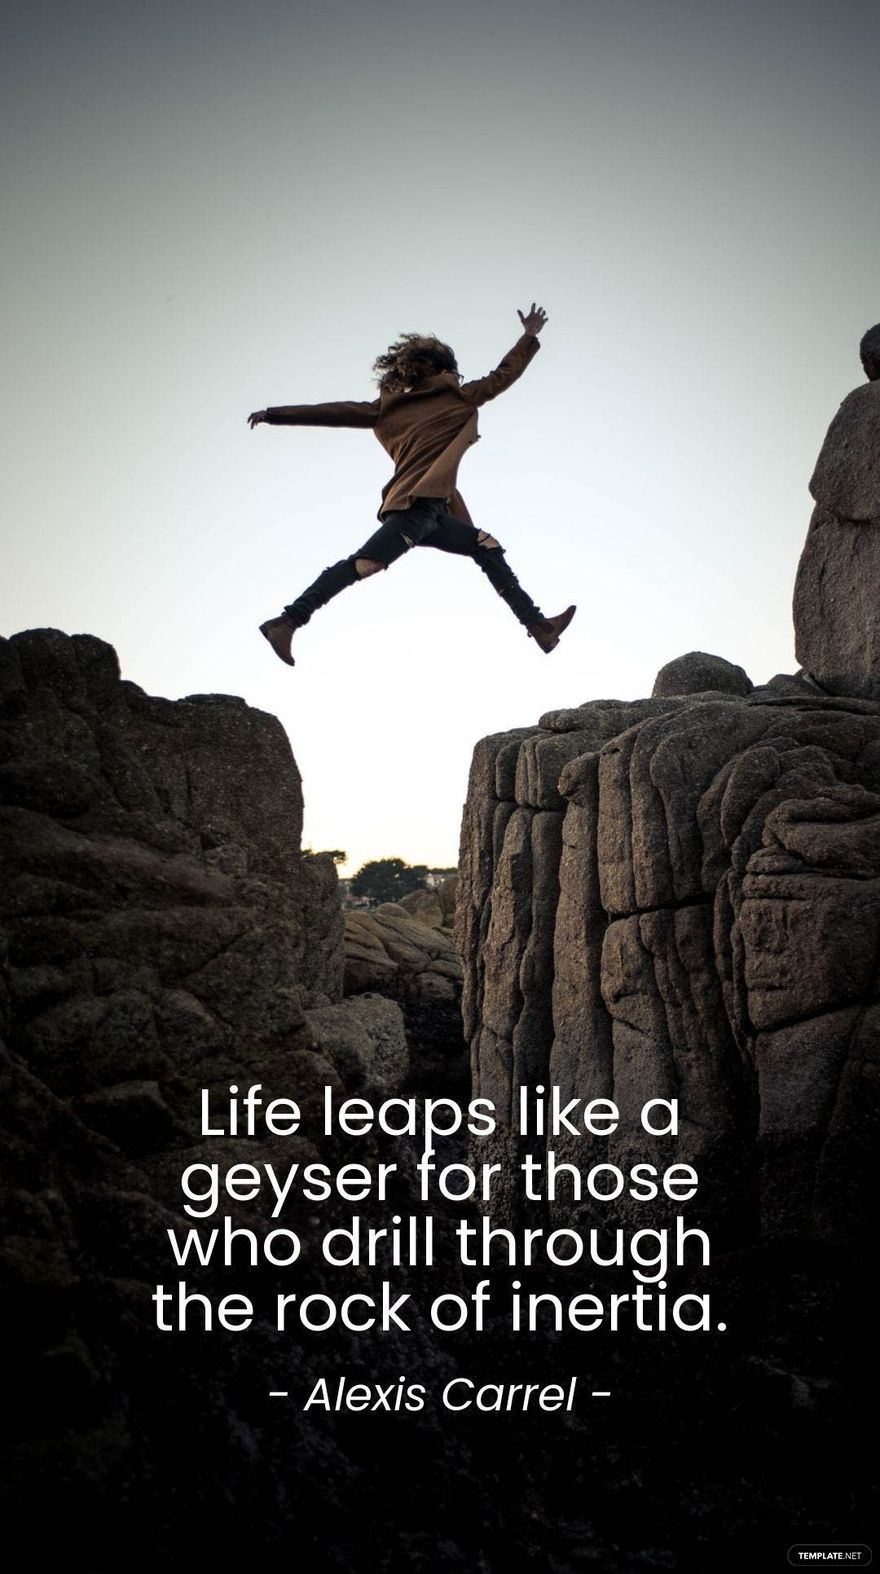 Alexis Carrel - Life leaps like a geyser for those who drill through the rock of inertia.